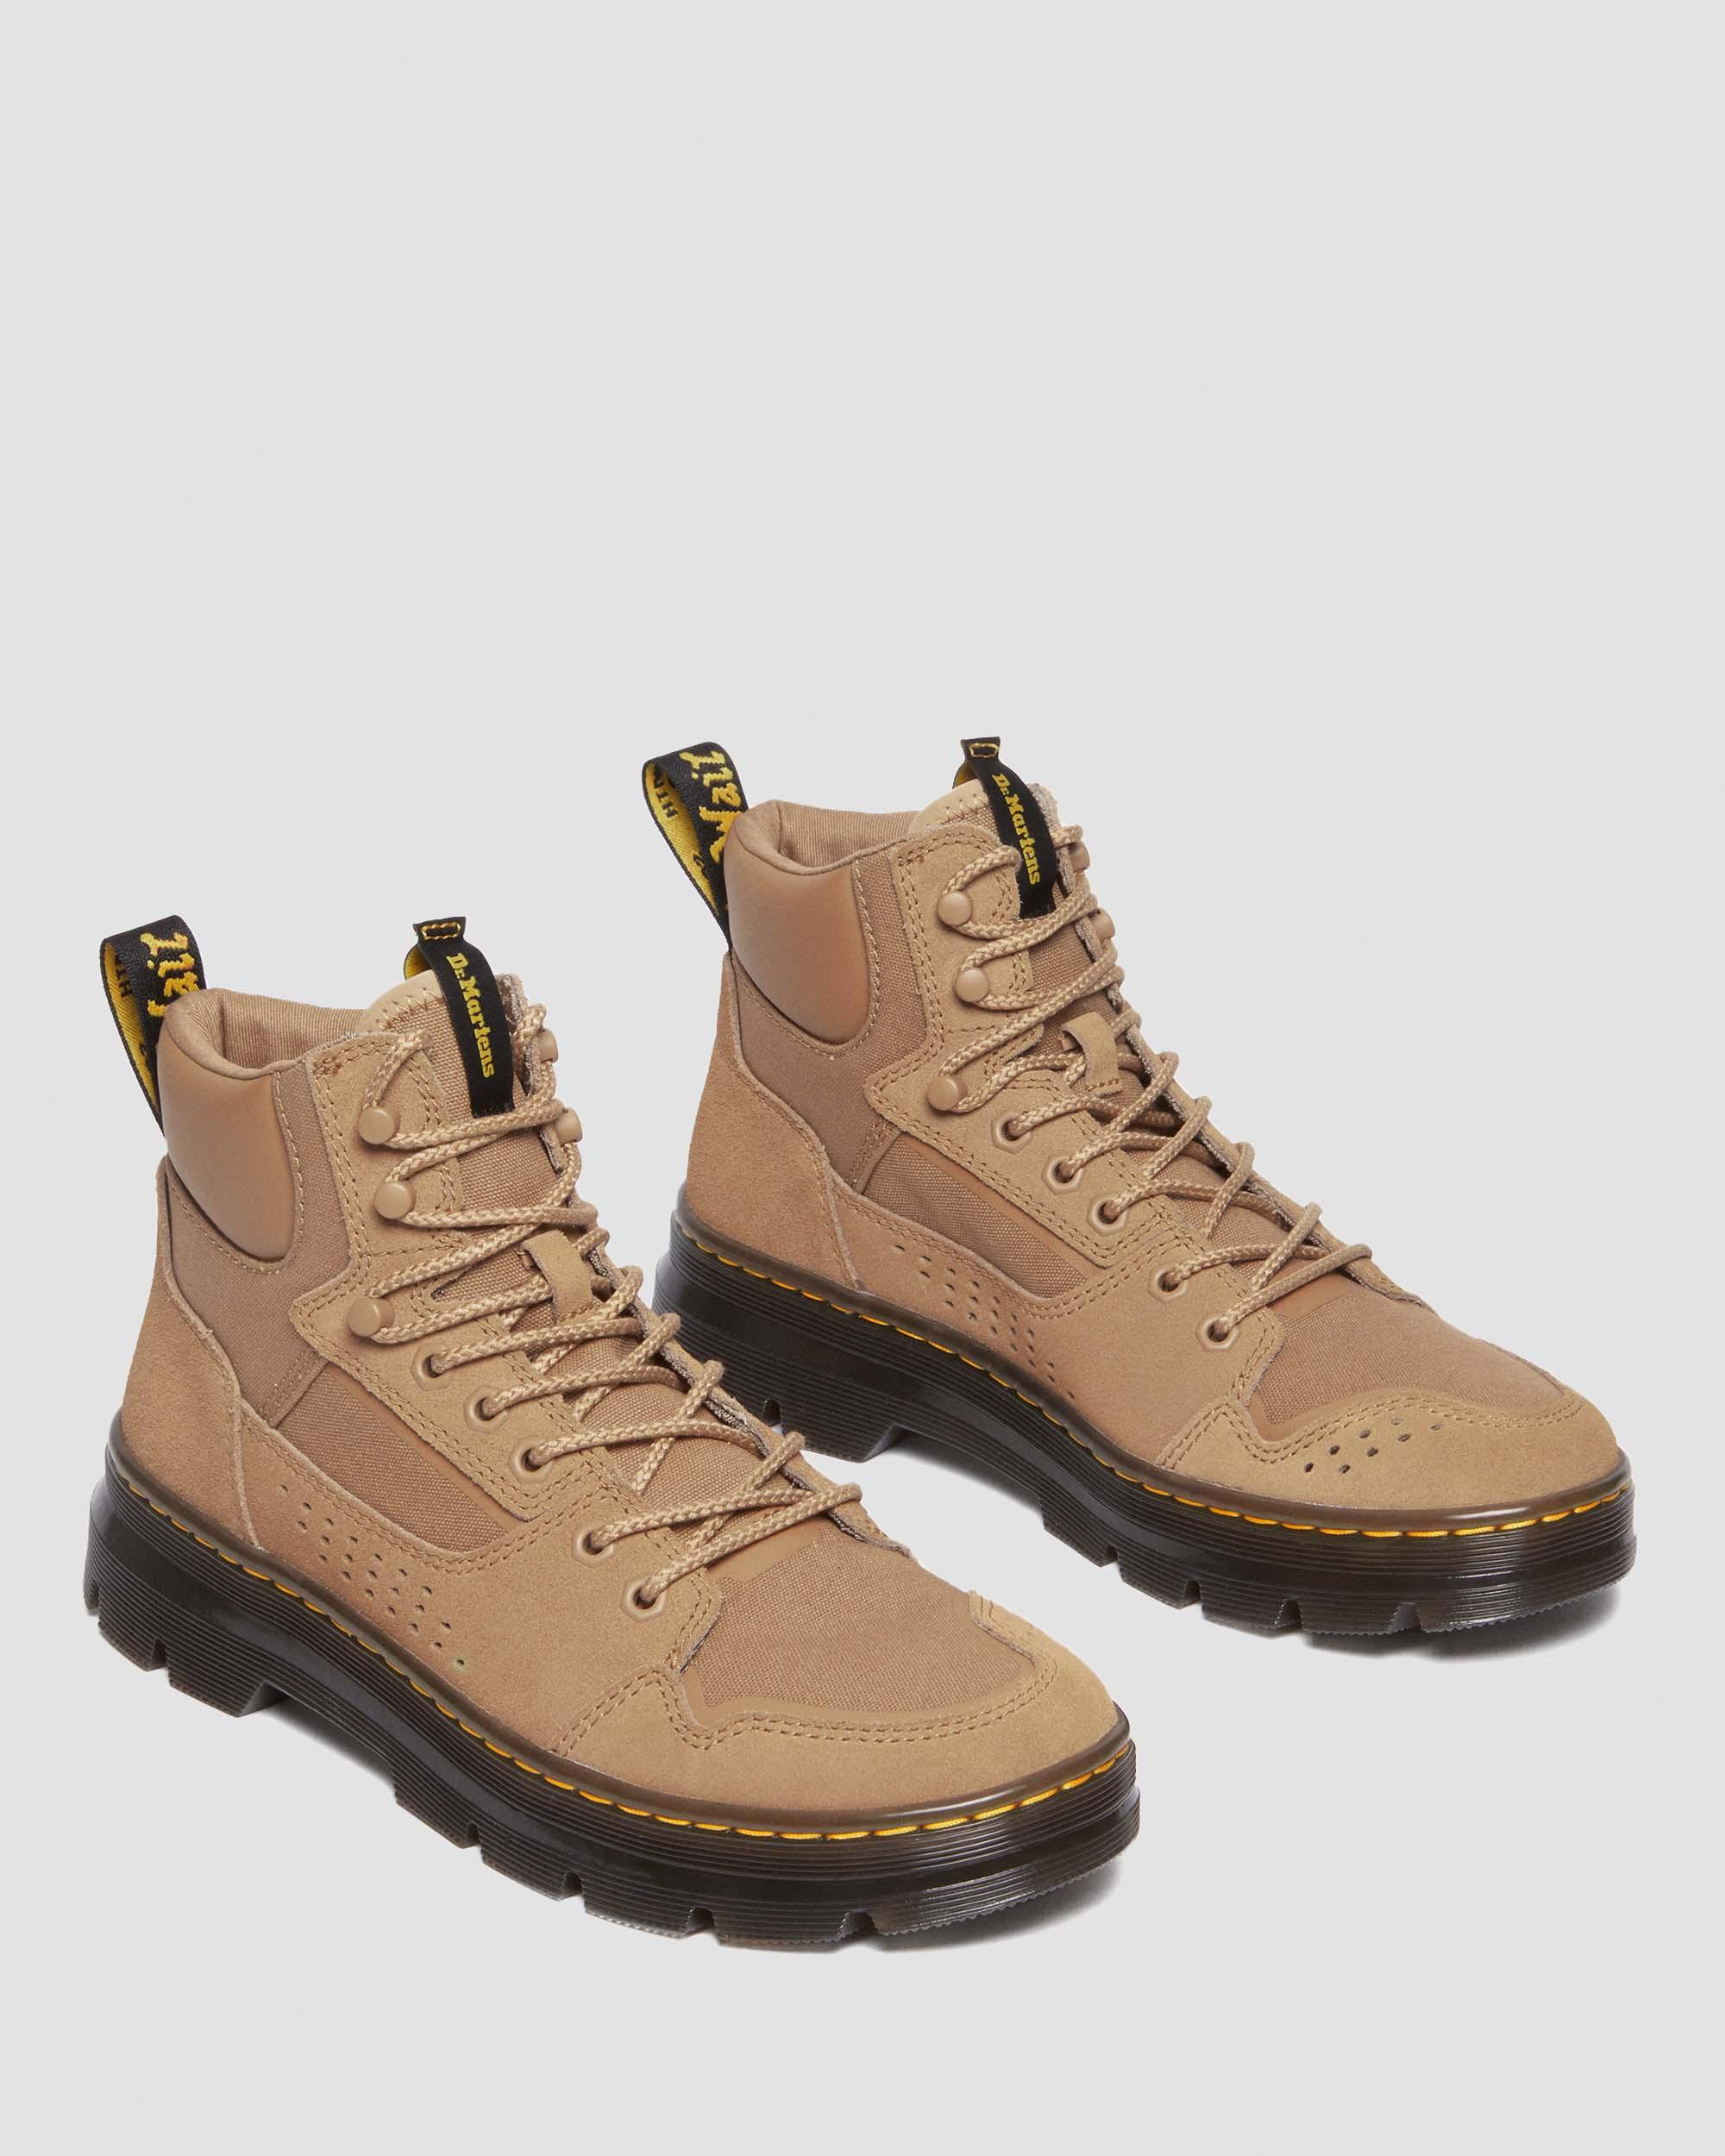 Rilla Canvas & Suede Lace up Utility Boots in Savannah Tan